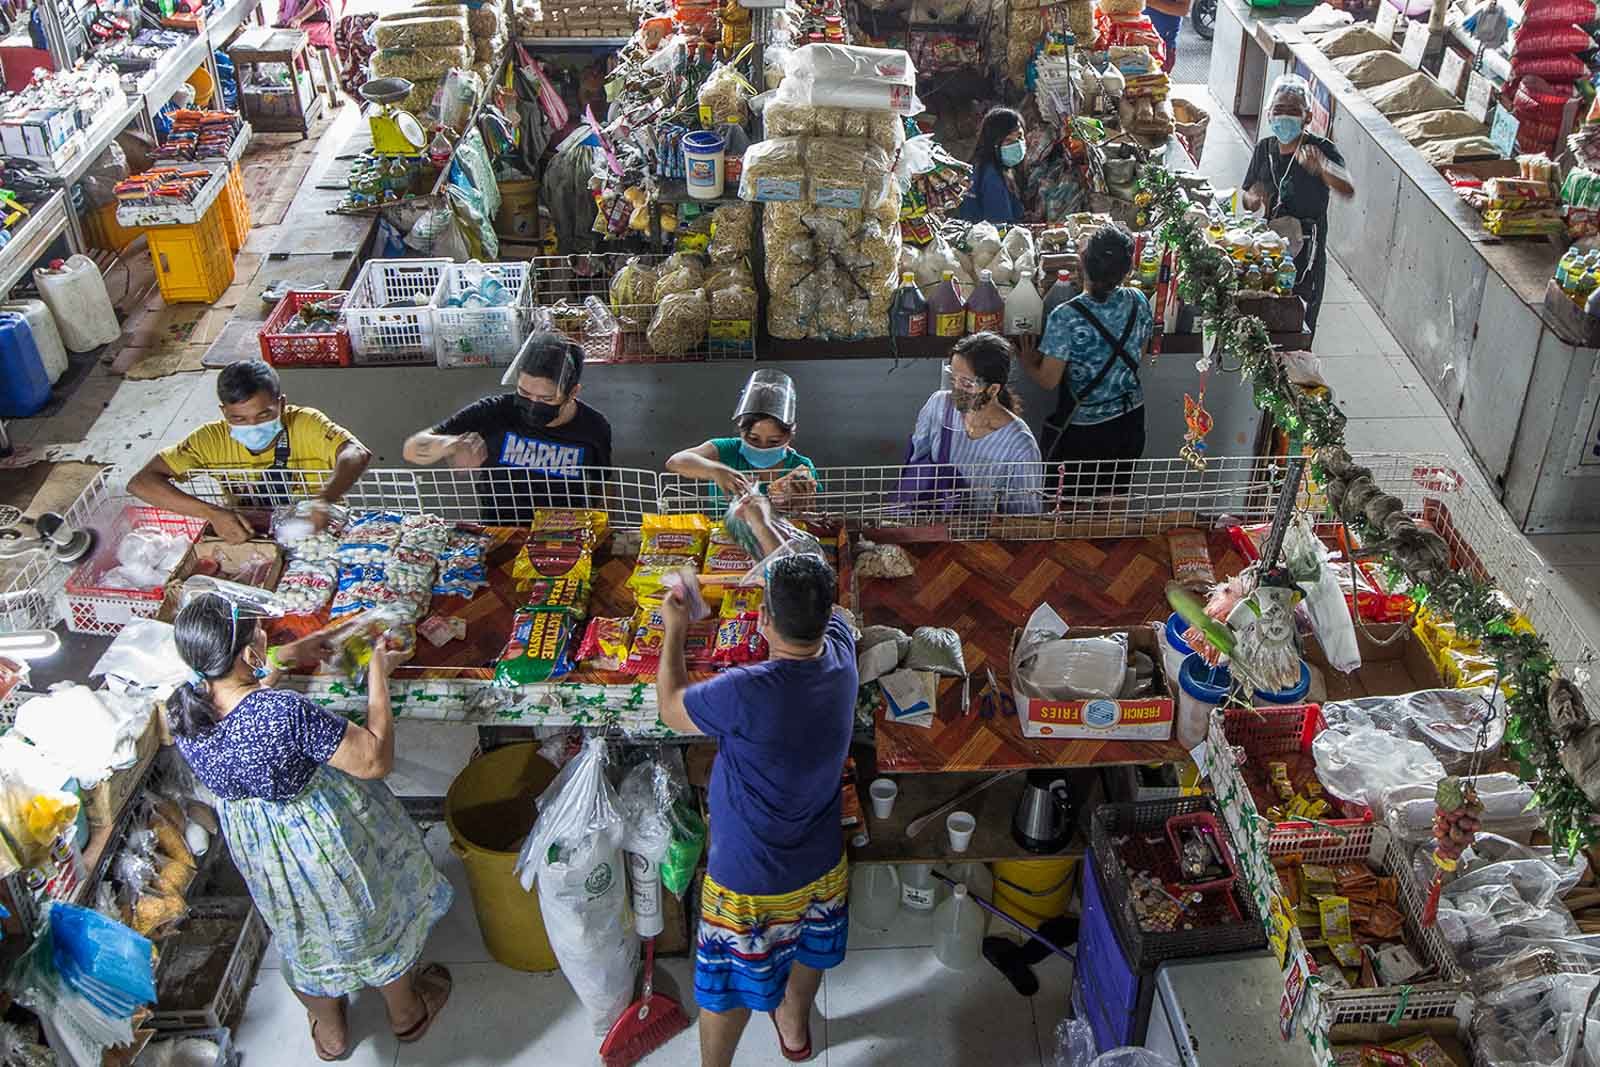 No surprise: Philippines misses inflation target for 2021